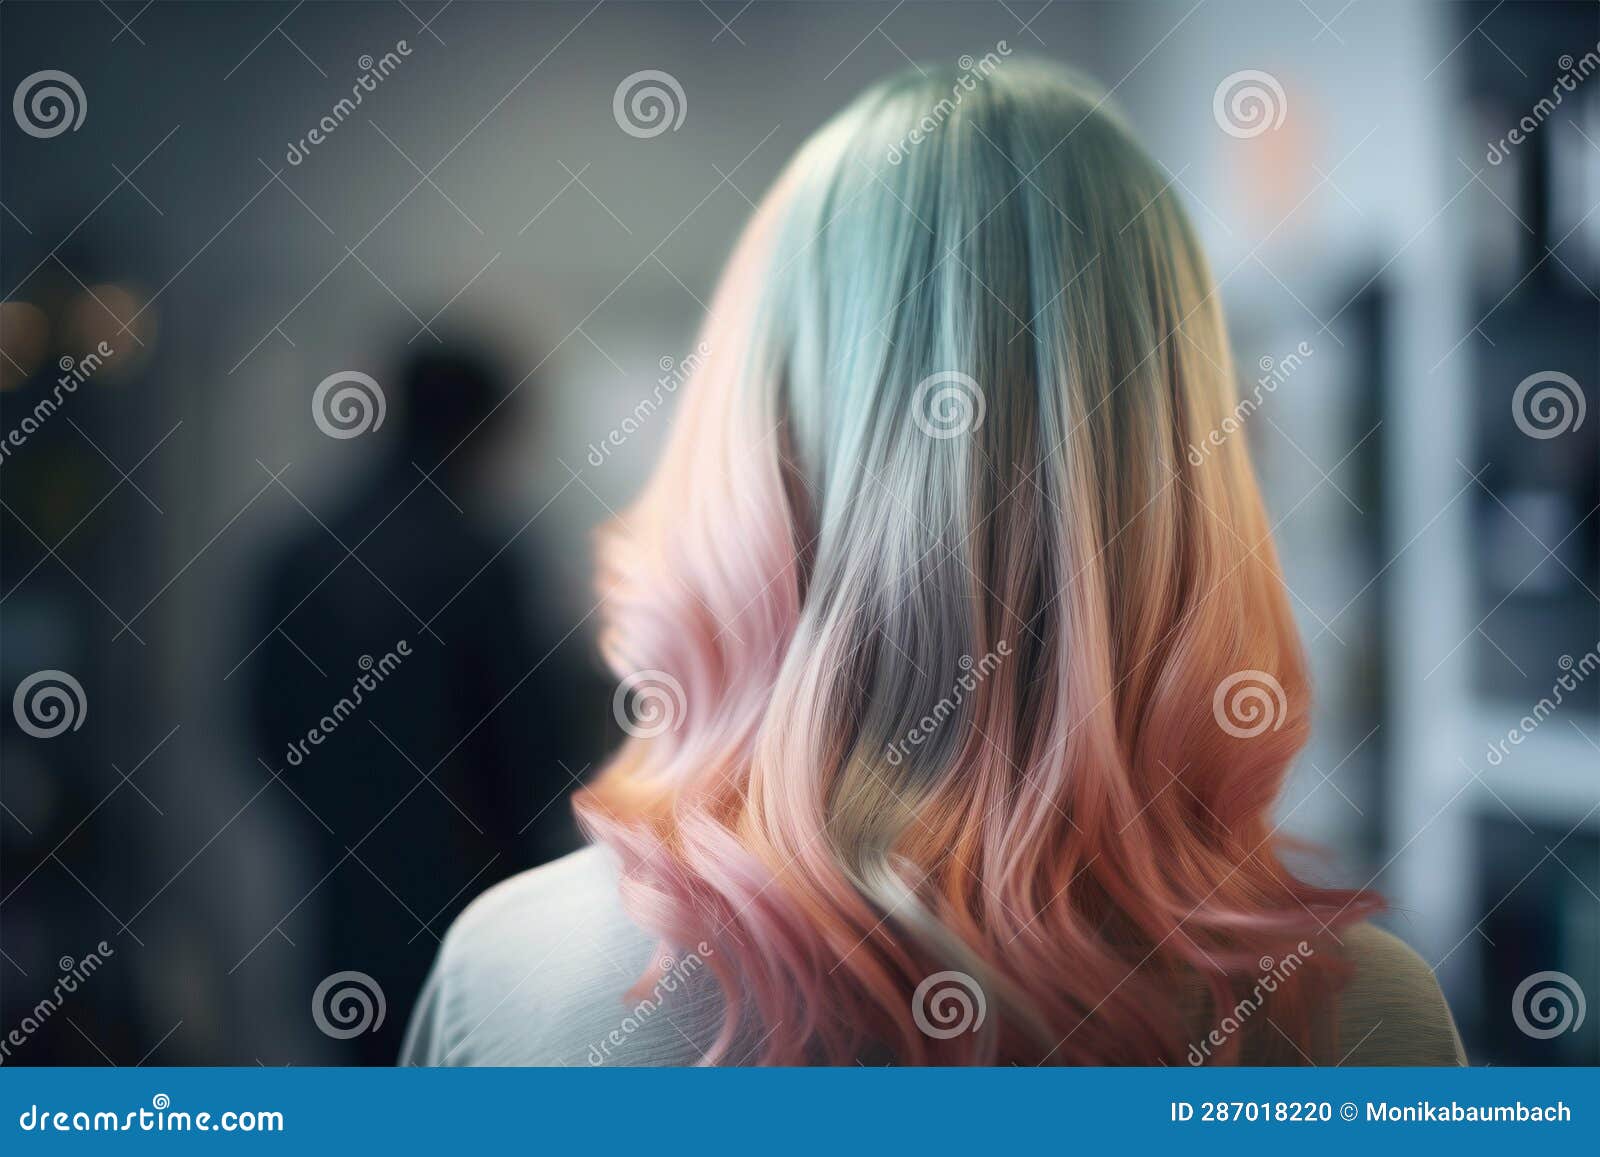 Pastel Blue and Pink Hair Dye - wide 10